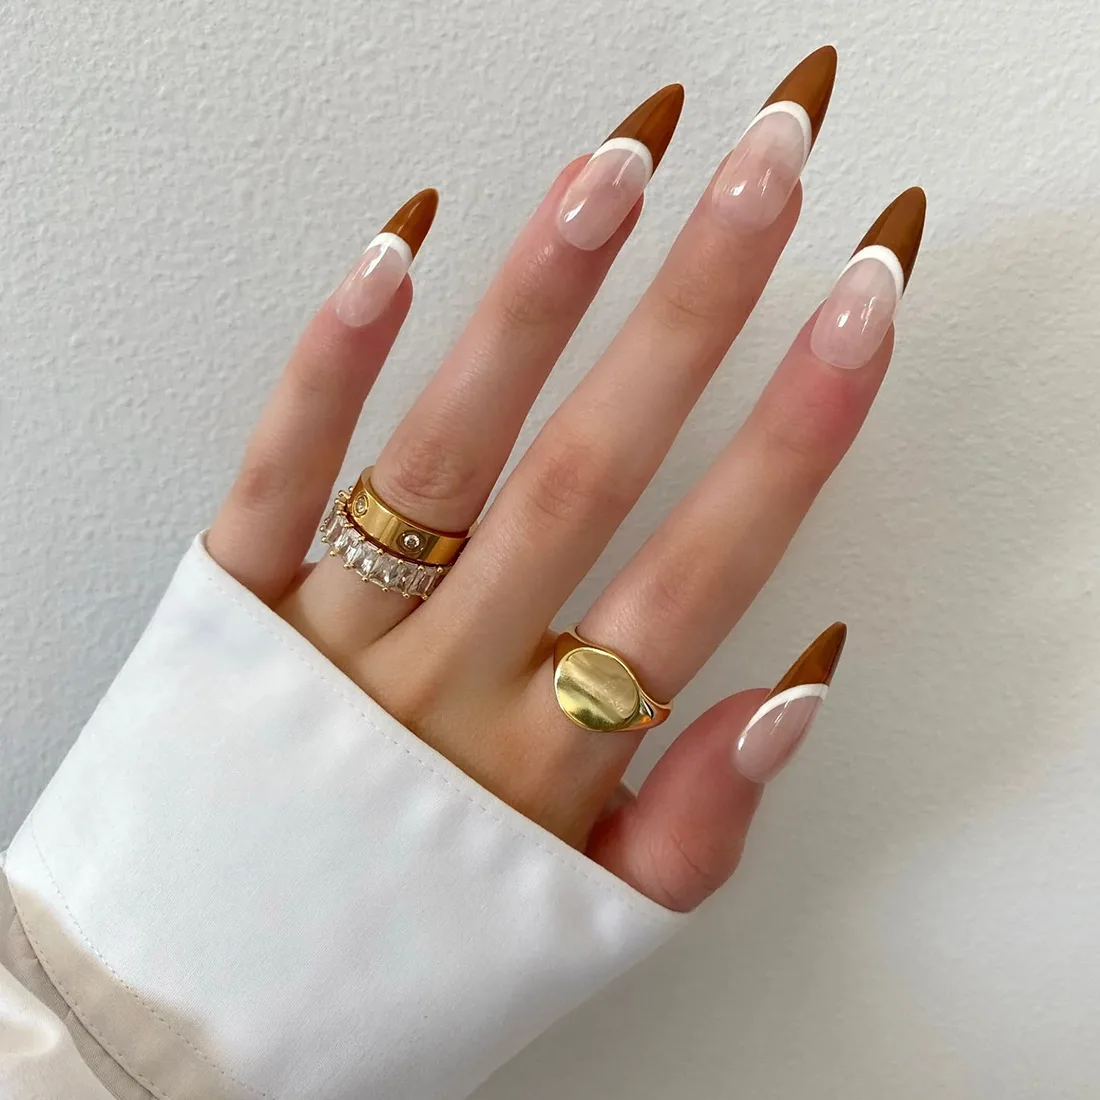 Celebrity Manicurist Elle Creates Nail Designs Featuring Diamonds and Gems  | Nailpro